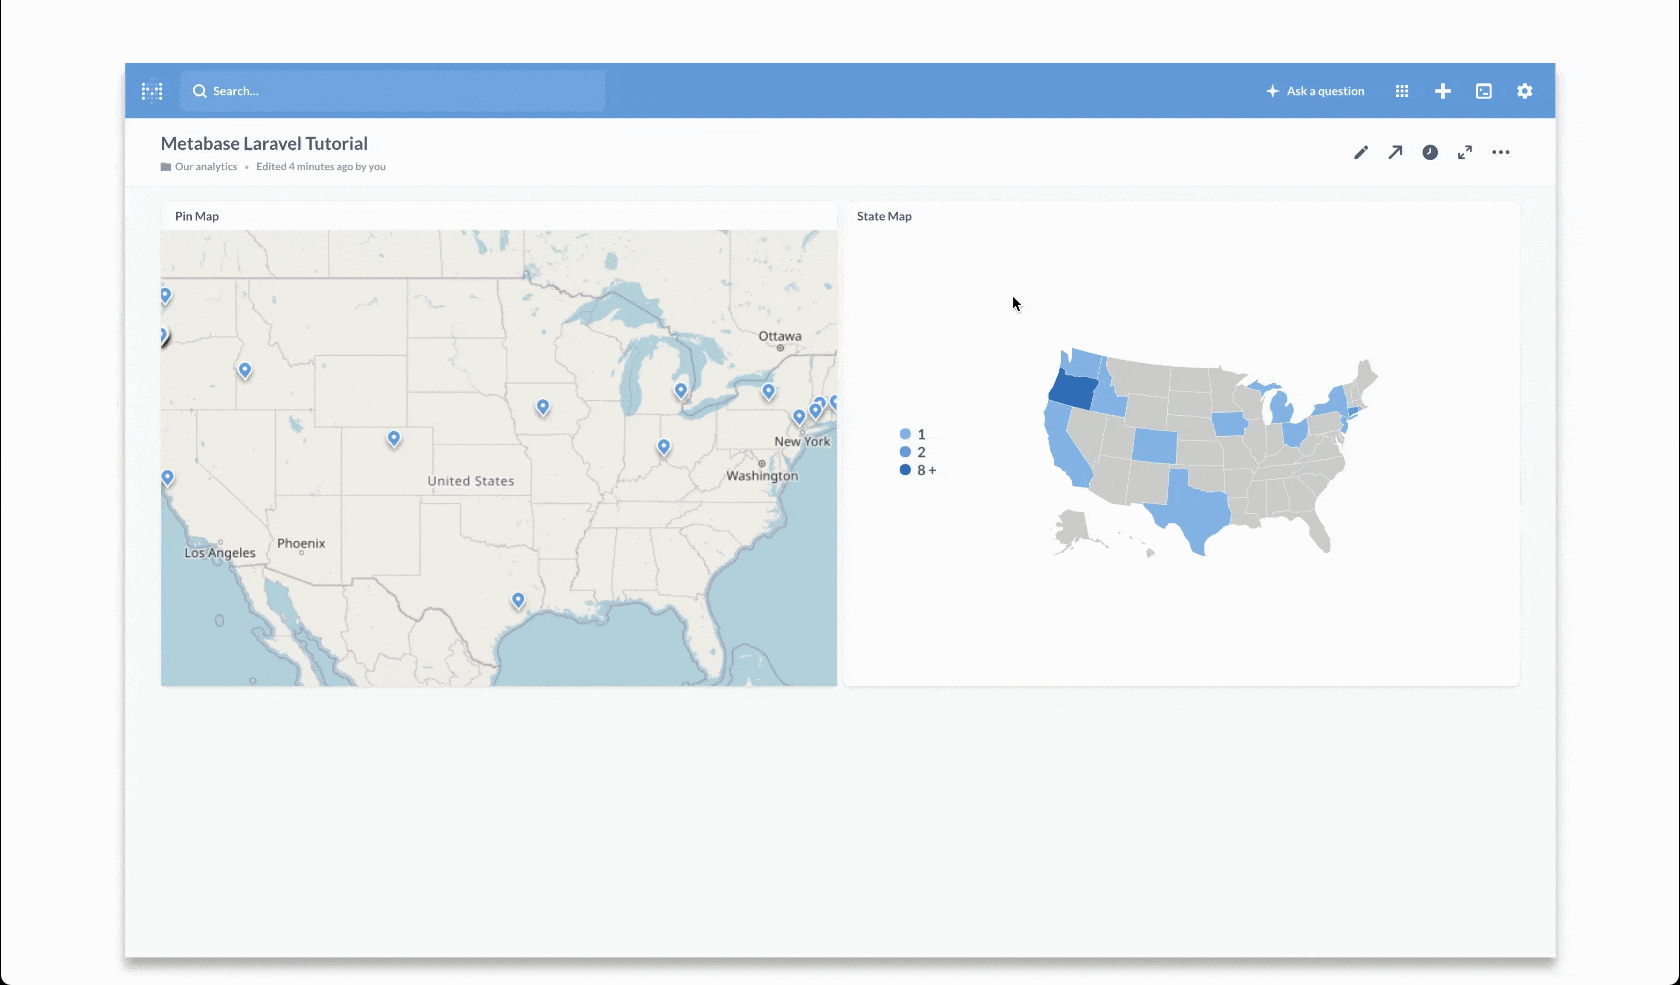 Demo of Metabase filters based on Geocodio data with Metabase pin maps